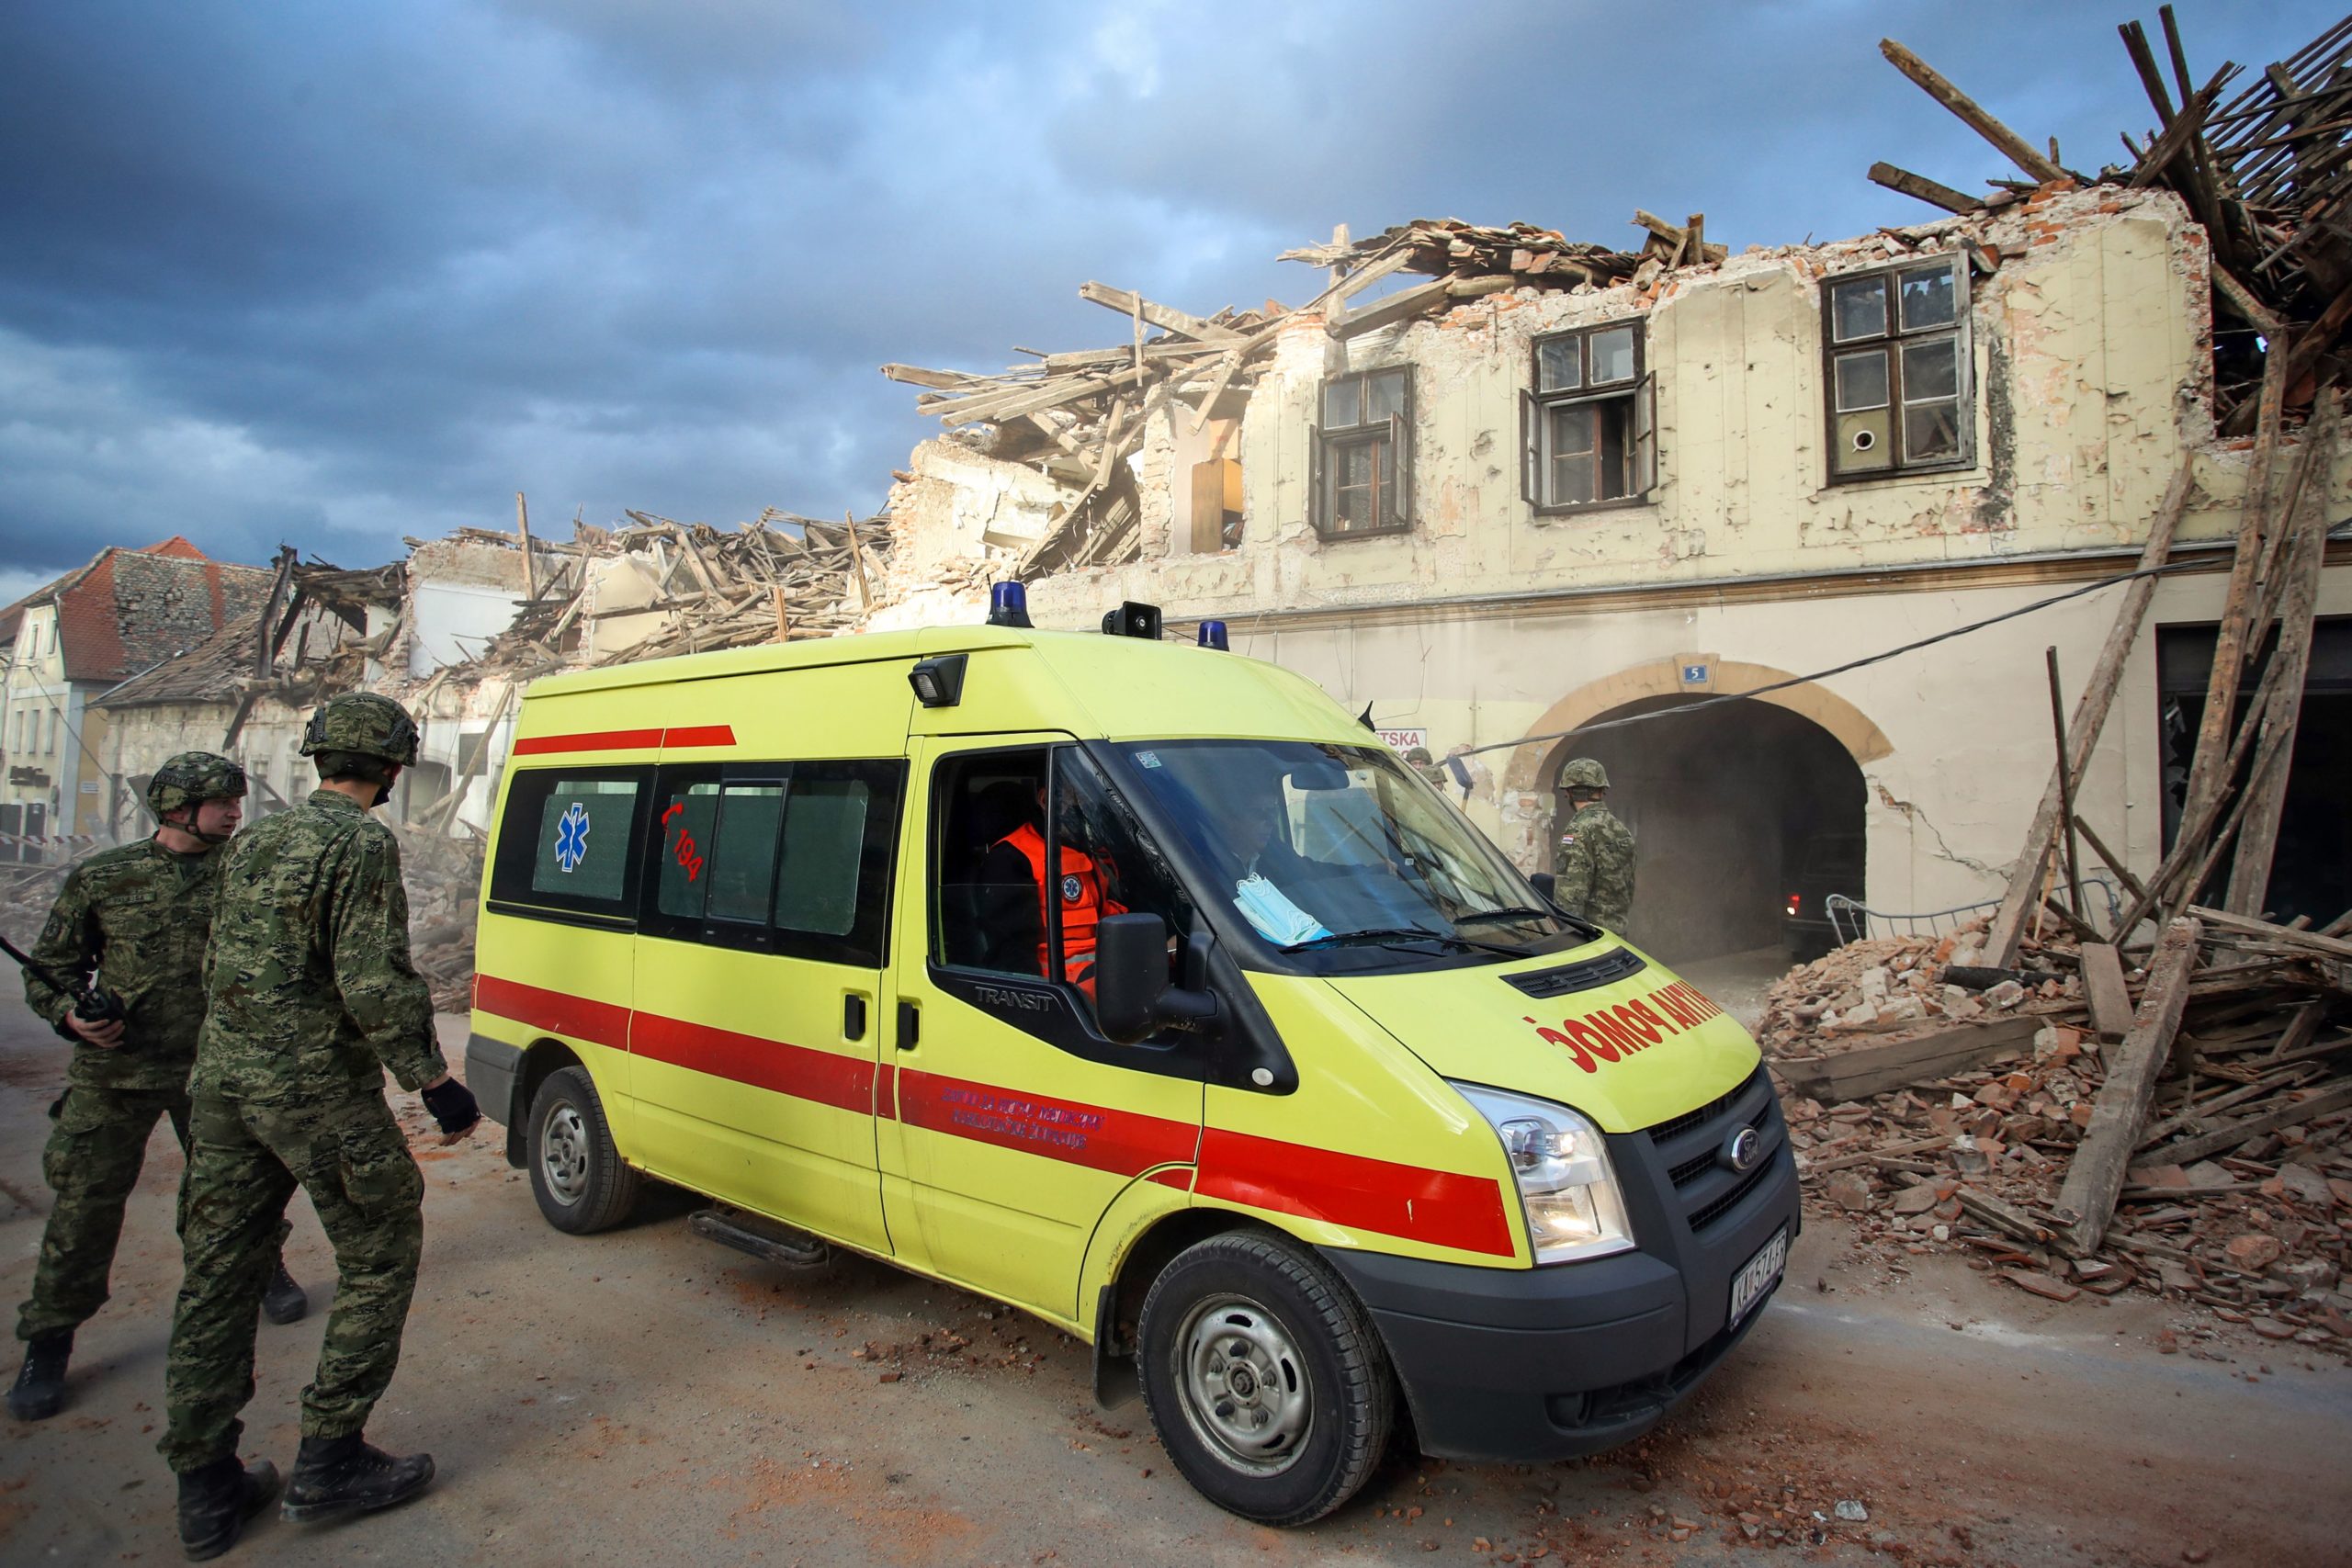 Crotian soldiers walk next to a first aid vehicle and damaged buildings in Petrinja, some 50kms from Zagreb, after the town was hit by an earthquake of the magnitude of 6,4 on December 29, 2020. - The tremor, one of the strongest to rock Croatia in recent years, collapsed rooftops in Petrinja, home to some 20,000 people, and left the streets strewn with bricks and other debris. Rescue workers and the army were deployed to search for trapped residents, as a girl was reported dead. (Photo by Damir Sencar/AFP via Getty Images)